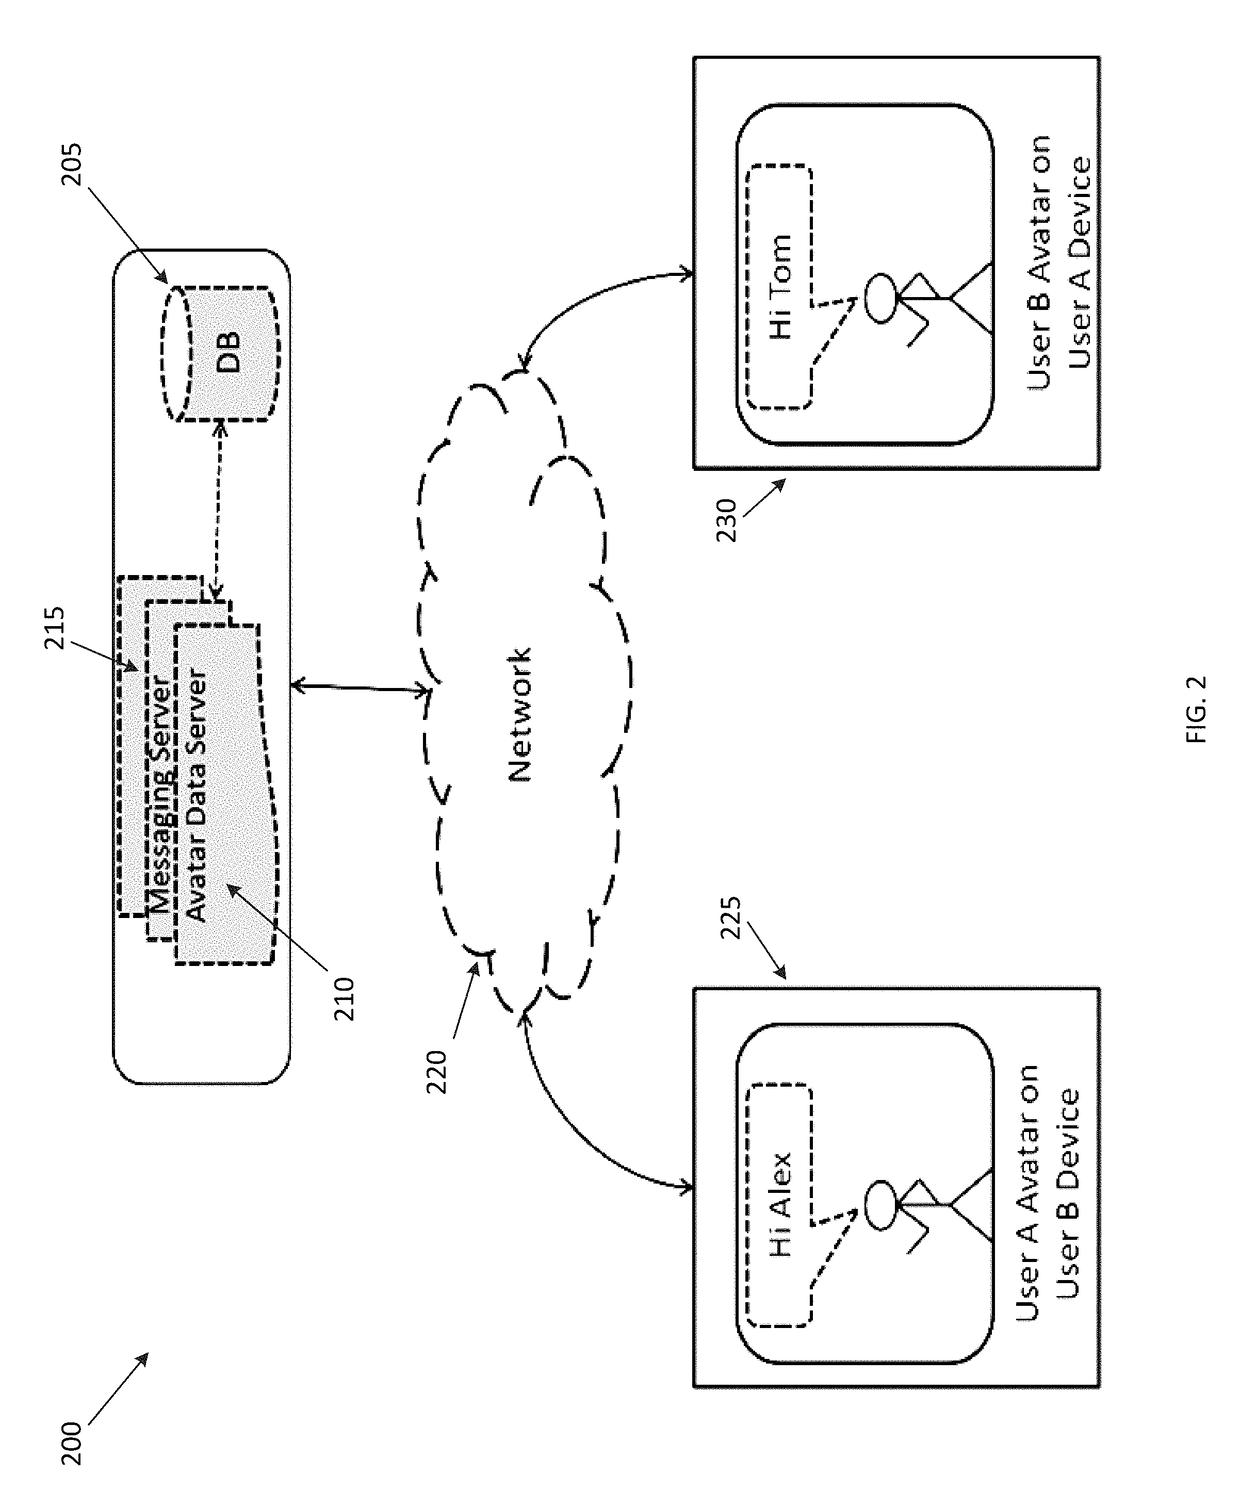 System and method for facilitating communication via interaction with an avatar